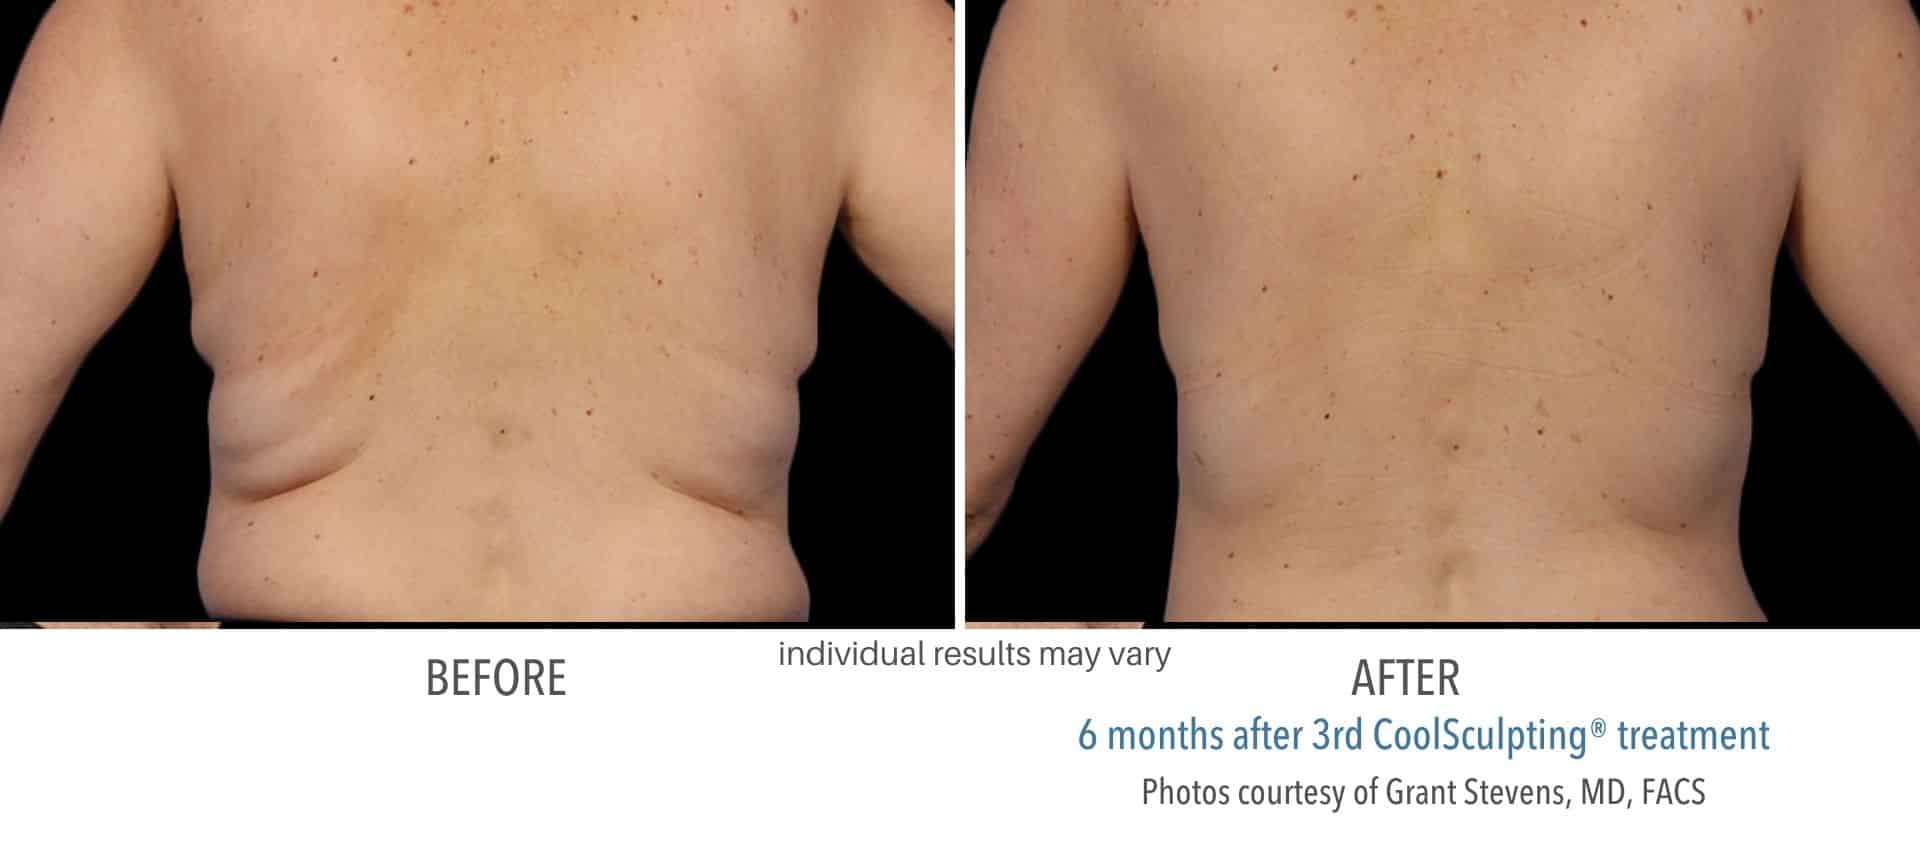 CoolSculpting Before & After Photos - Riverside Medical S.C